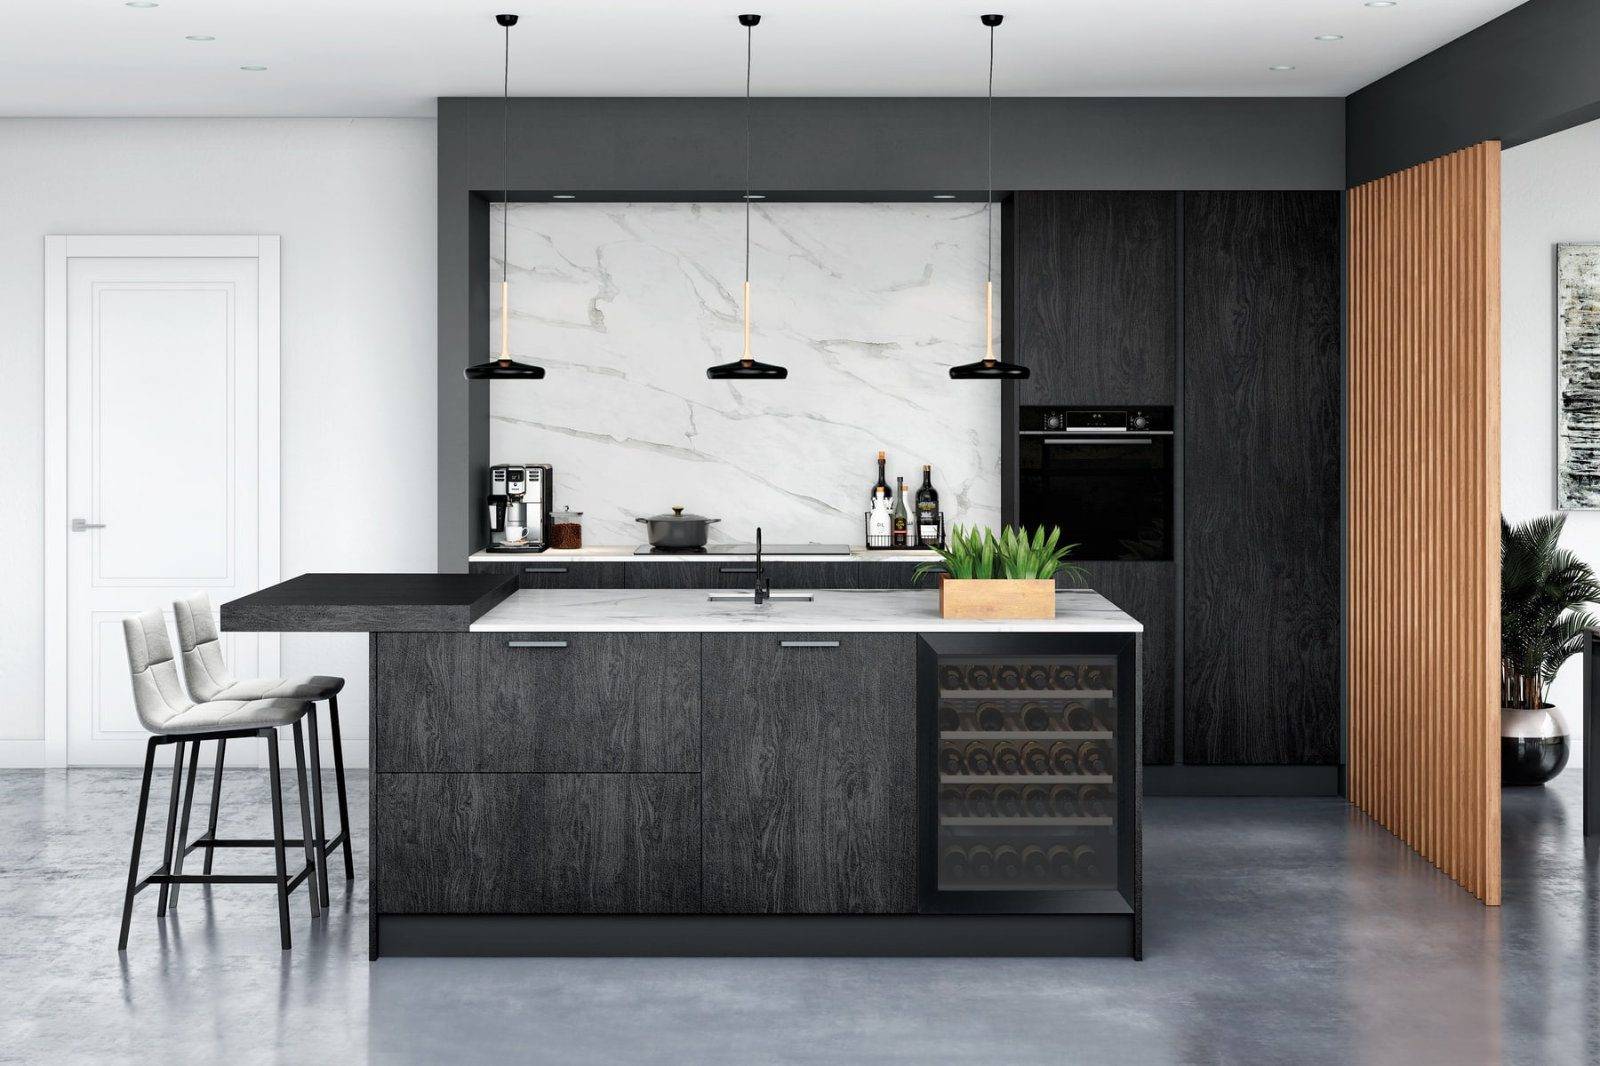 Rotpunkt Memory Burned Wood With Textured Paint Finish | Net Kitchens, Walthamstow